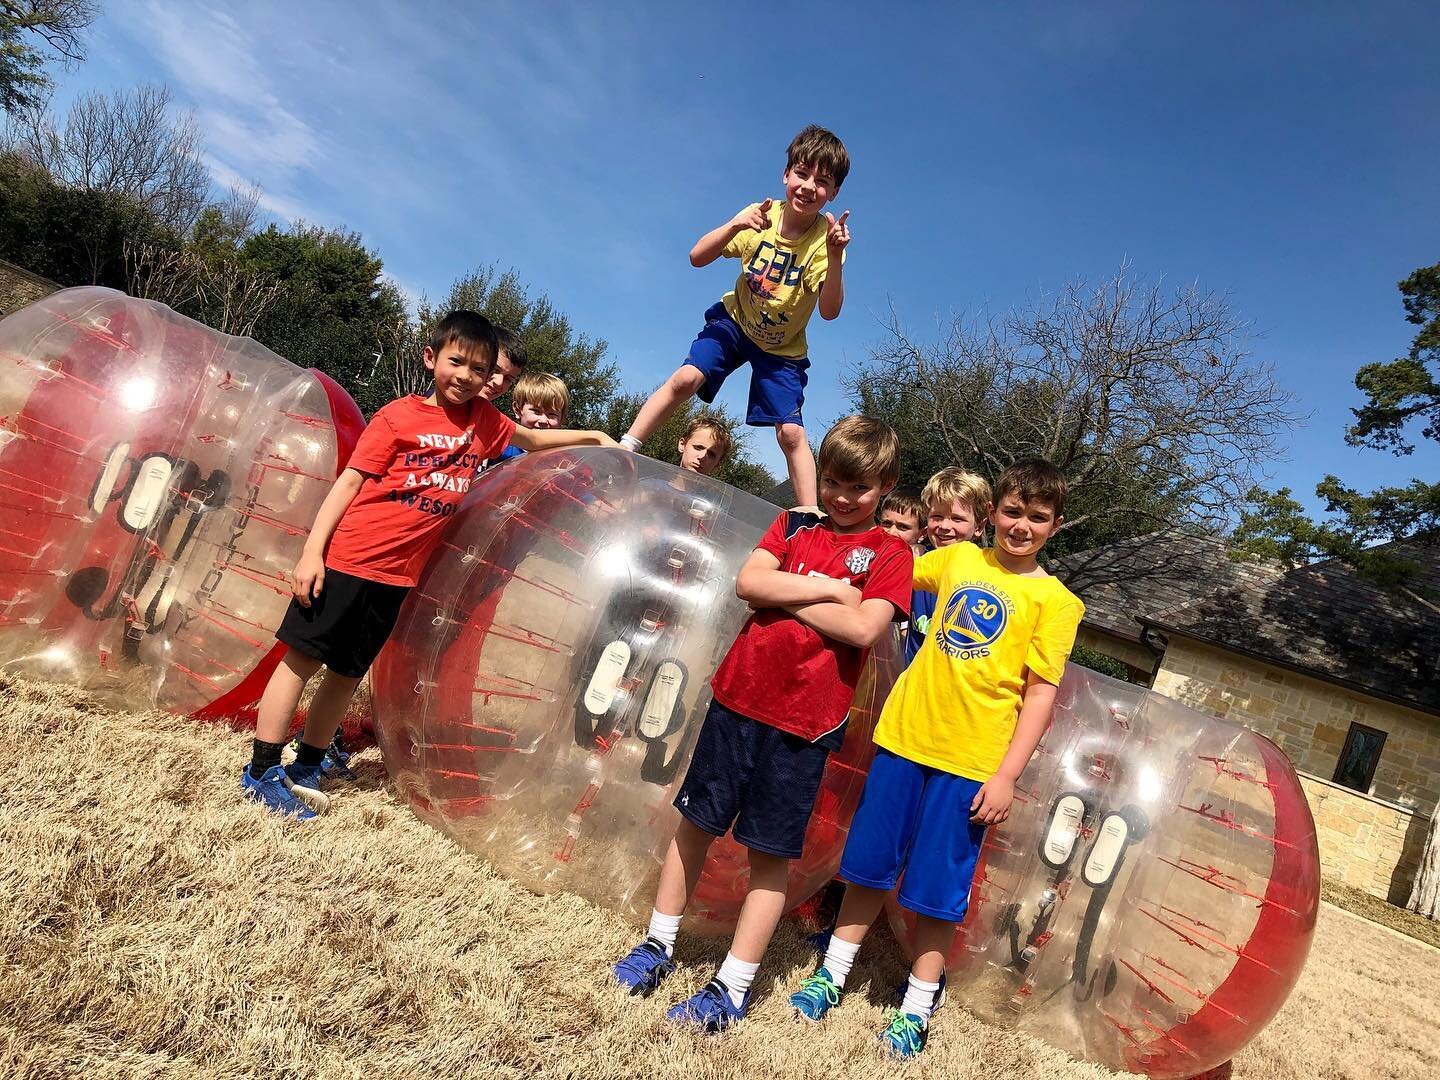 We want YOU to get in the ball! Call @dfwknockerball today at 214-263-7446 to book your next great time today! Let's #getintheball !!! #dfwknockerball #bubblesoccer #knockerball #parklife #ban #dallas #plano #frisco #arlington